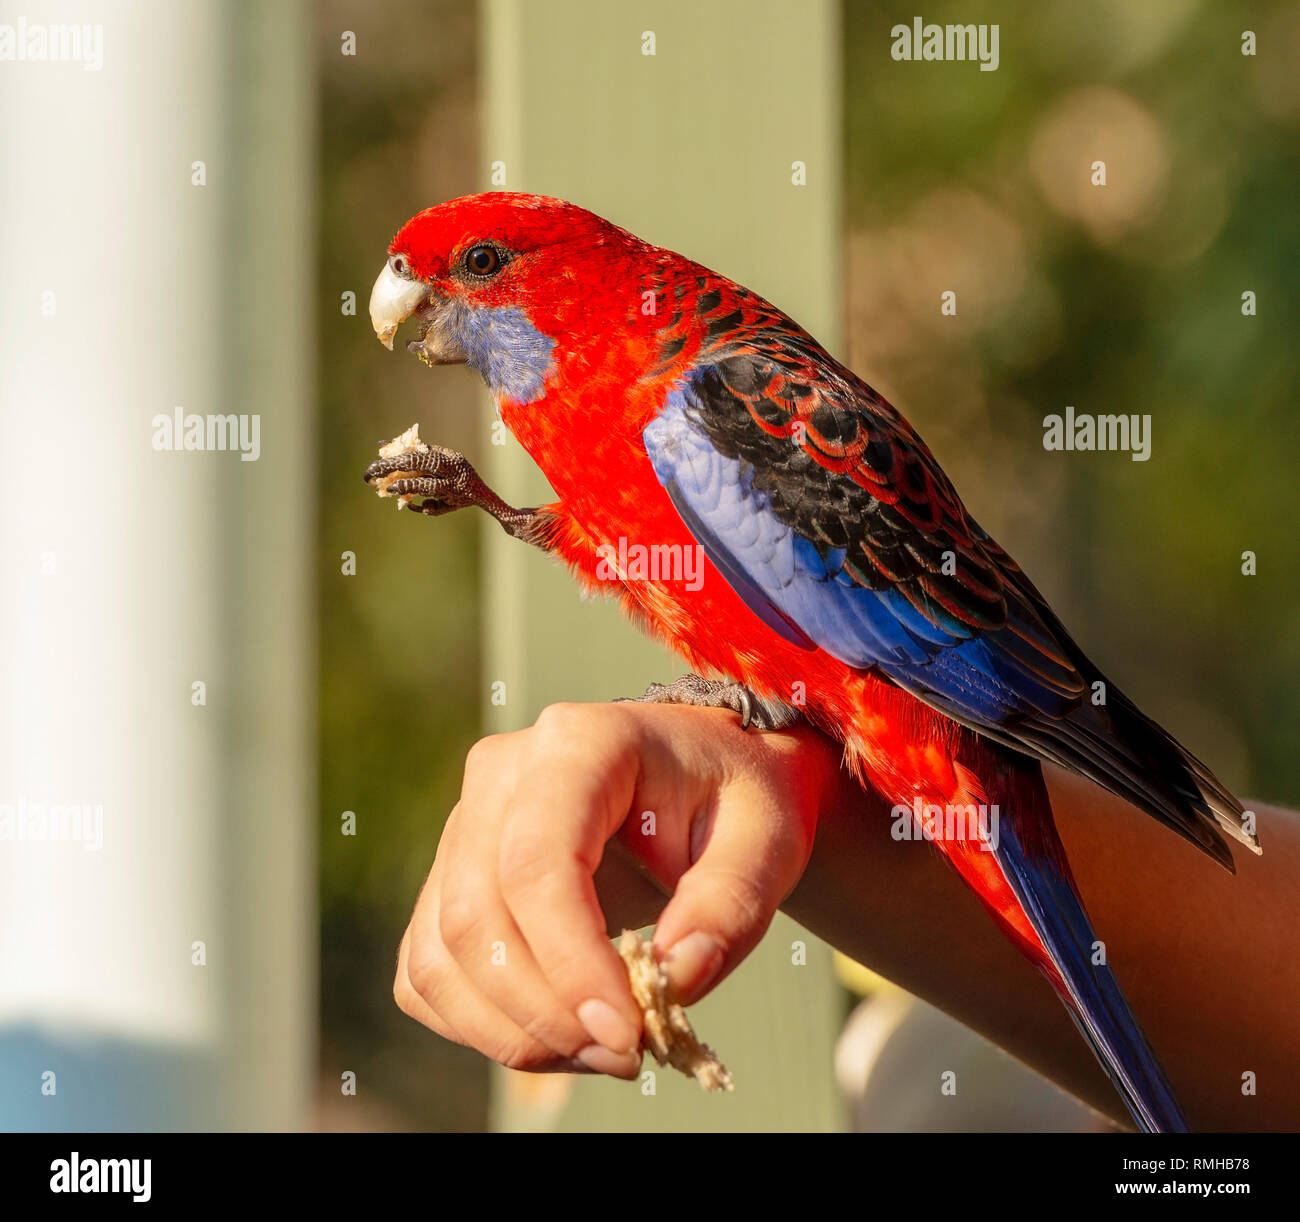 Feeding birds by hand with a Crimson Rosella in afternoon sunlight Stock Photo